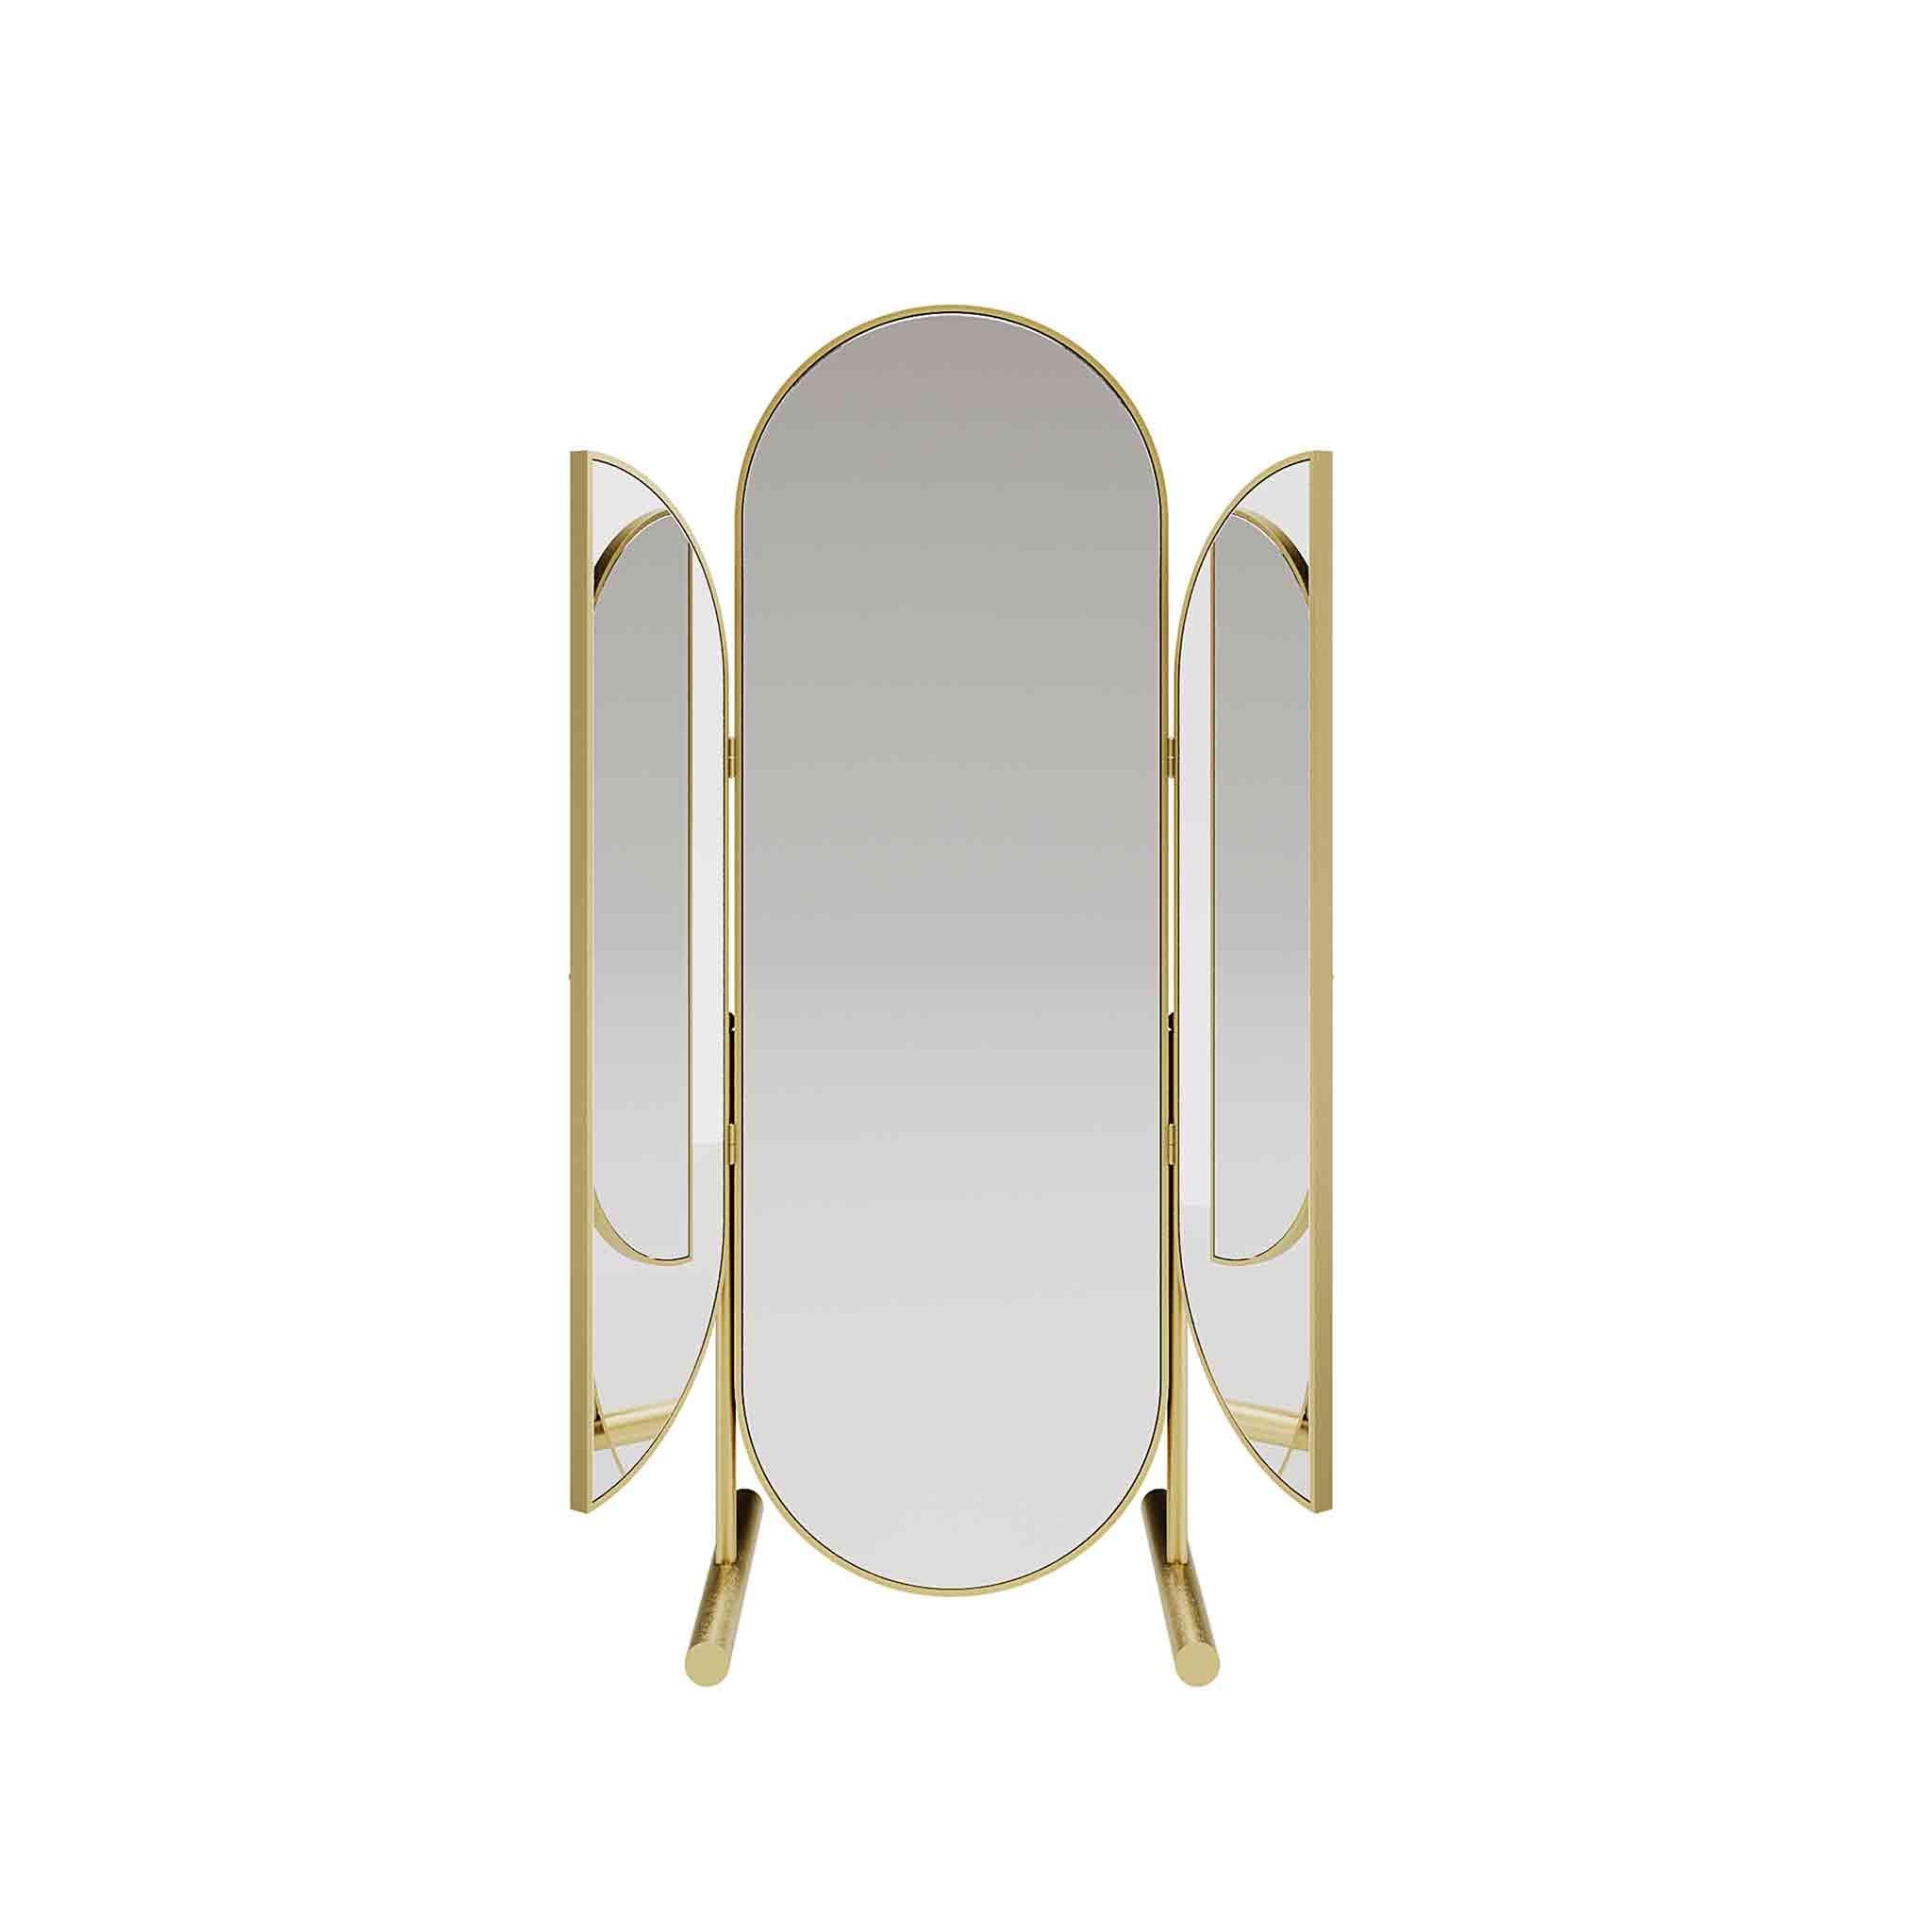 Narcissus Mirror is a large standing mirror that will brighten up just about any room. According to Greek mythology, Narcissus loved everything beautiful. One time, while leaning upon the water, he saw himself in the bloom of youth and fell in love